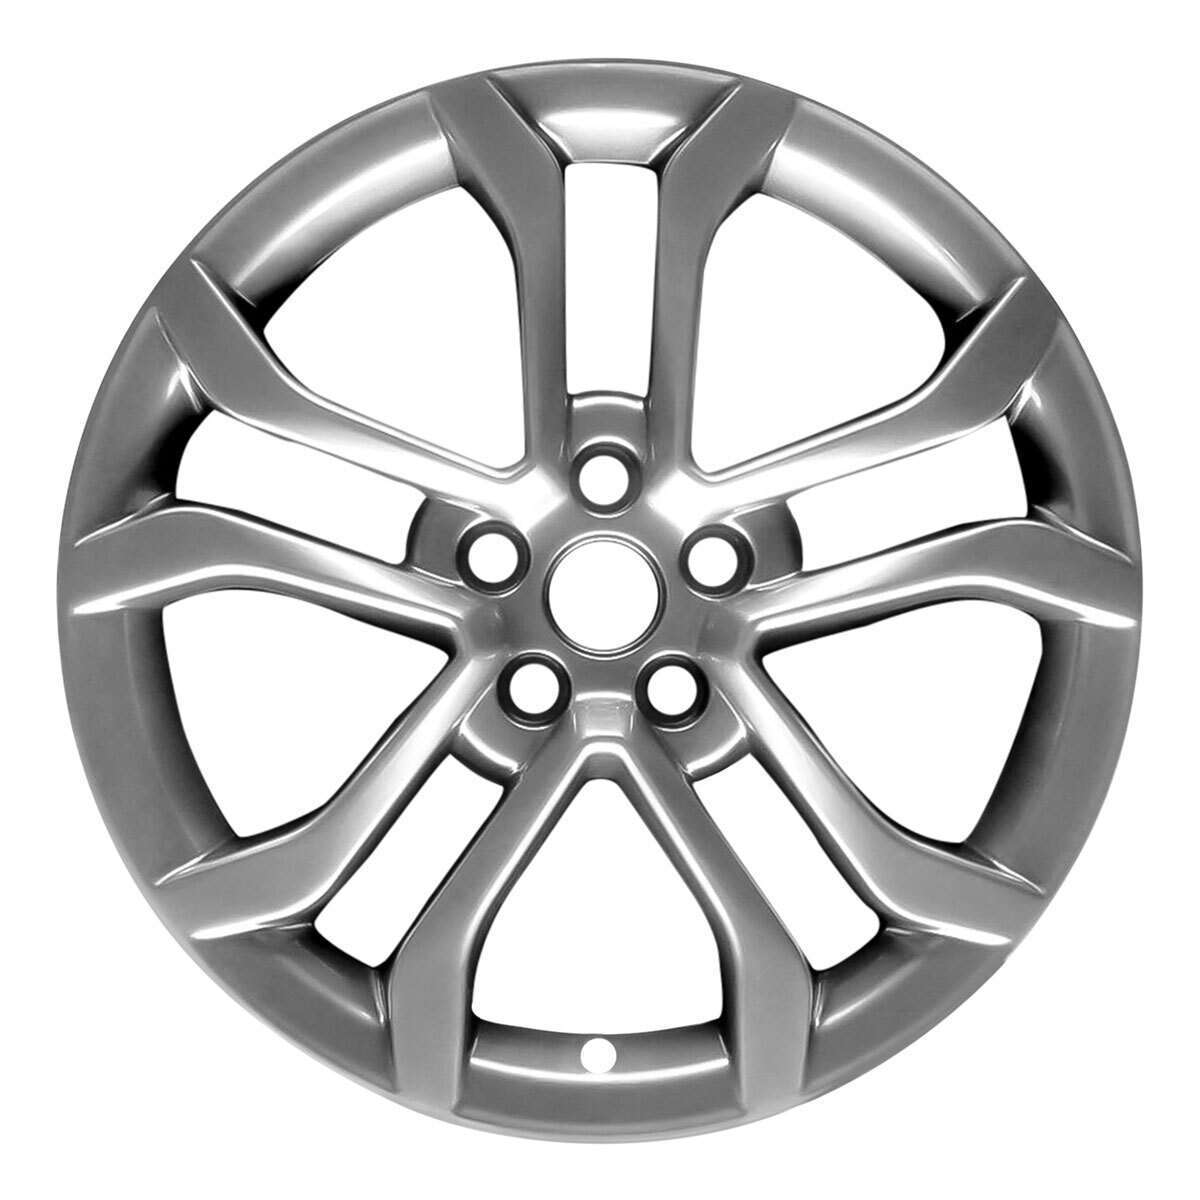 2019 Ford Fusion New 18" Replacement Wheel Rim RW10120S